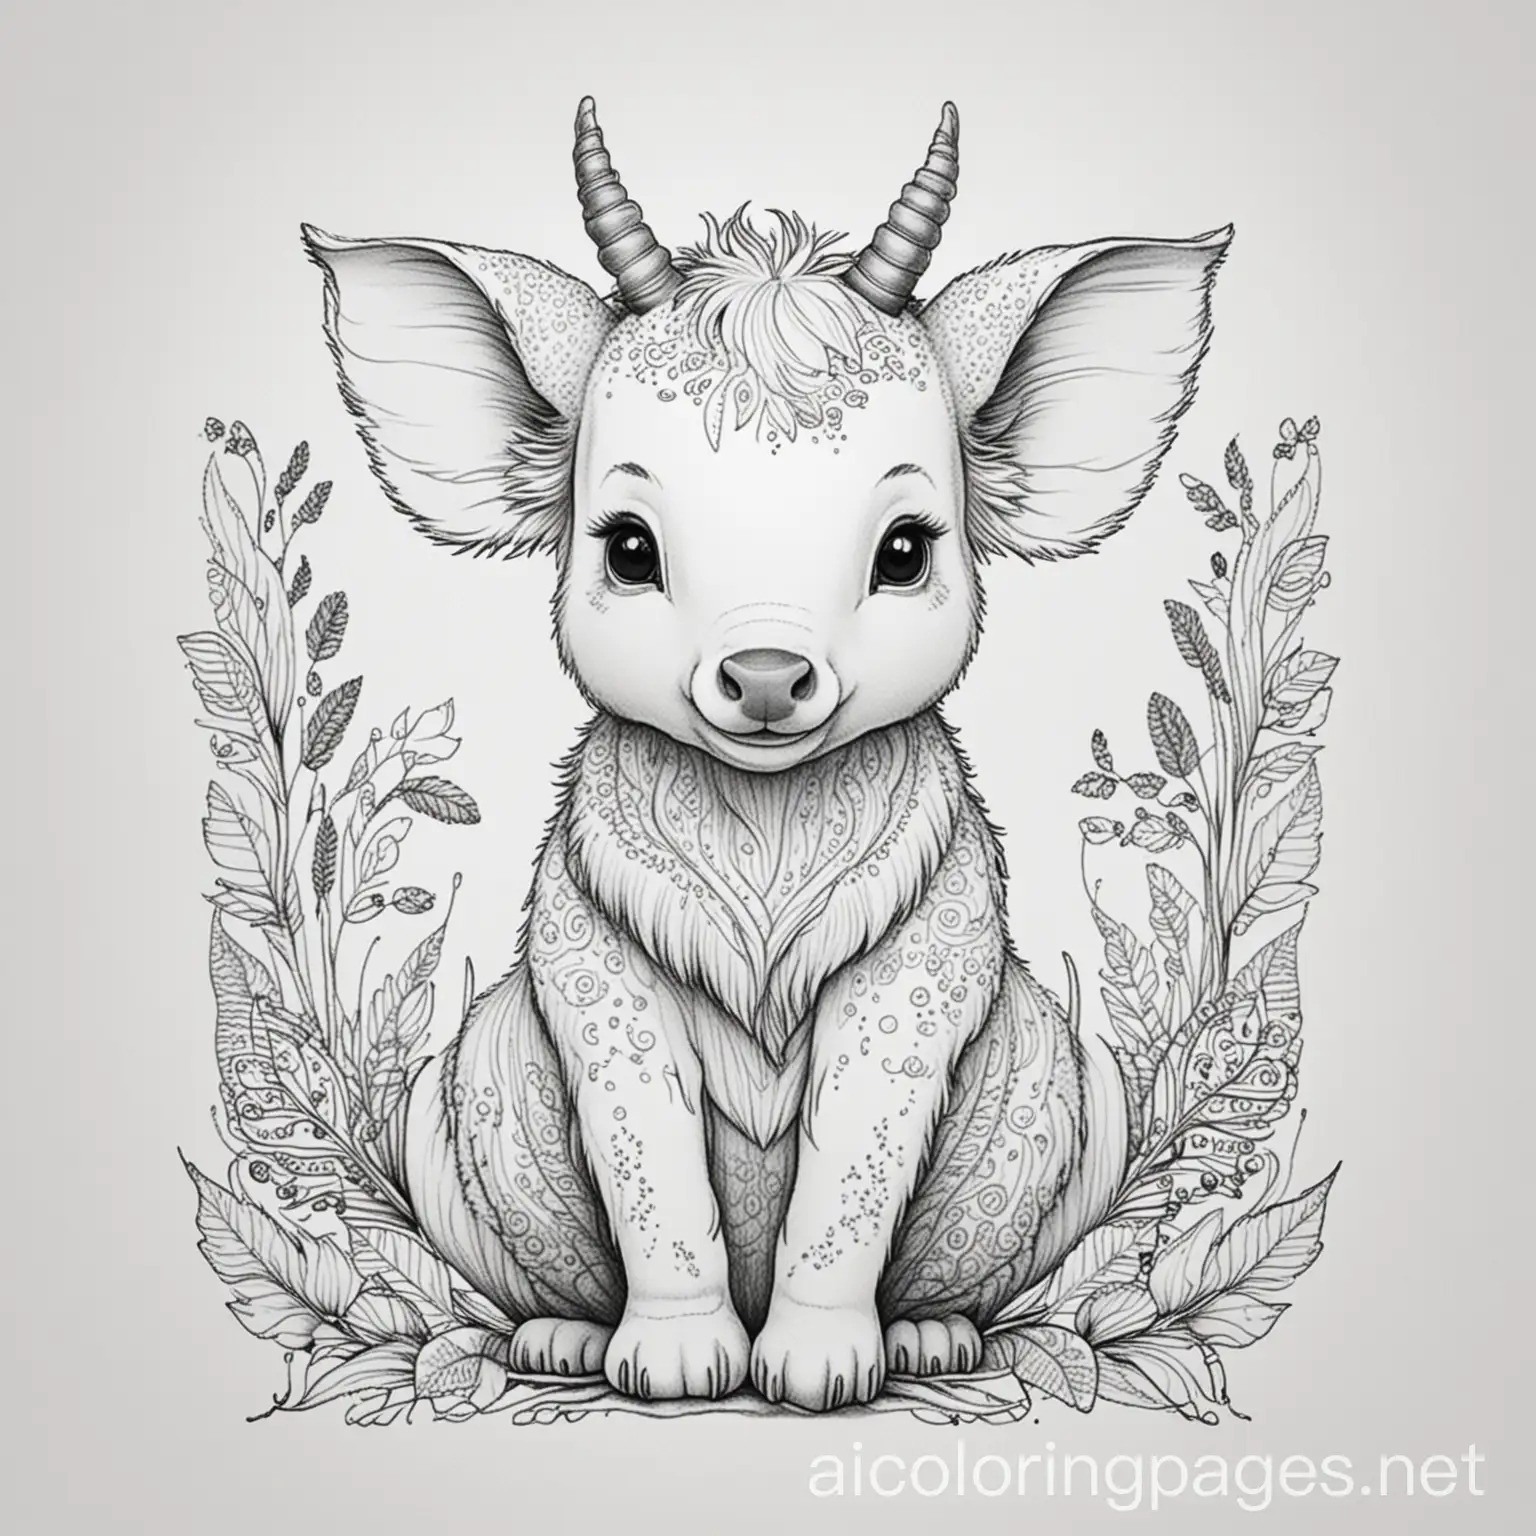 Adorable-Style-Animals-Coloring-Page-in-Black-and-White